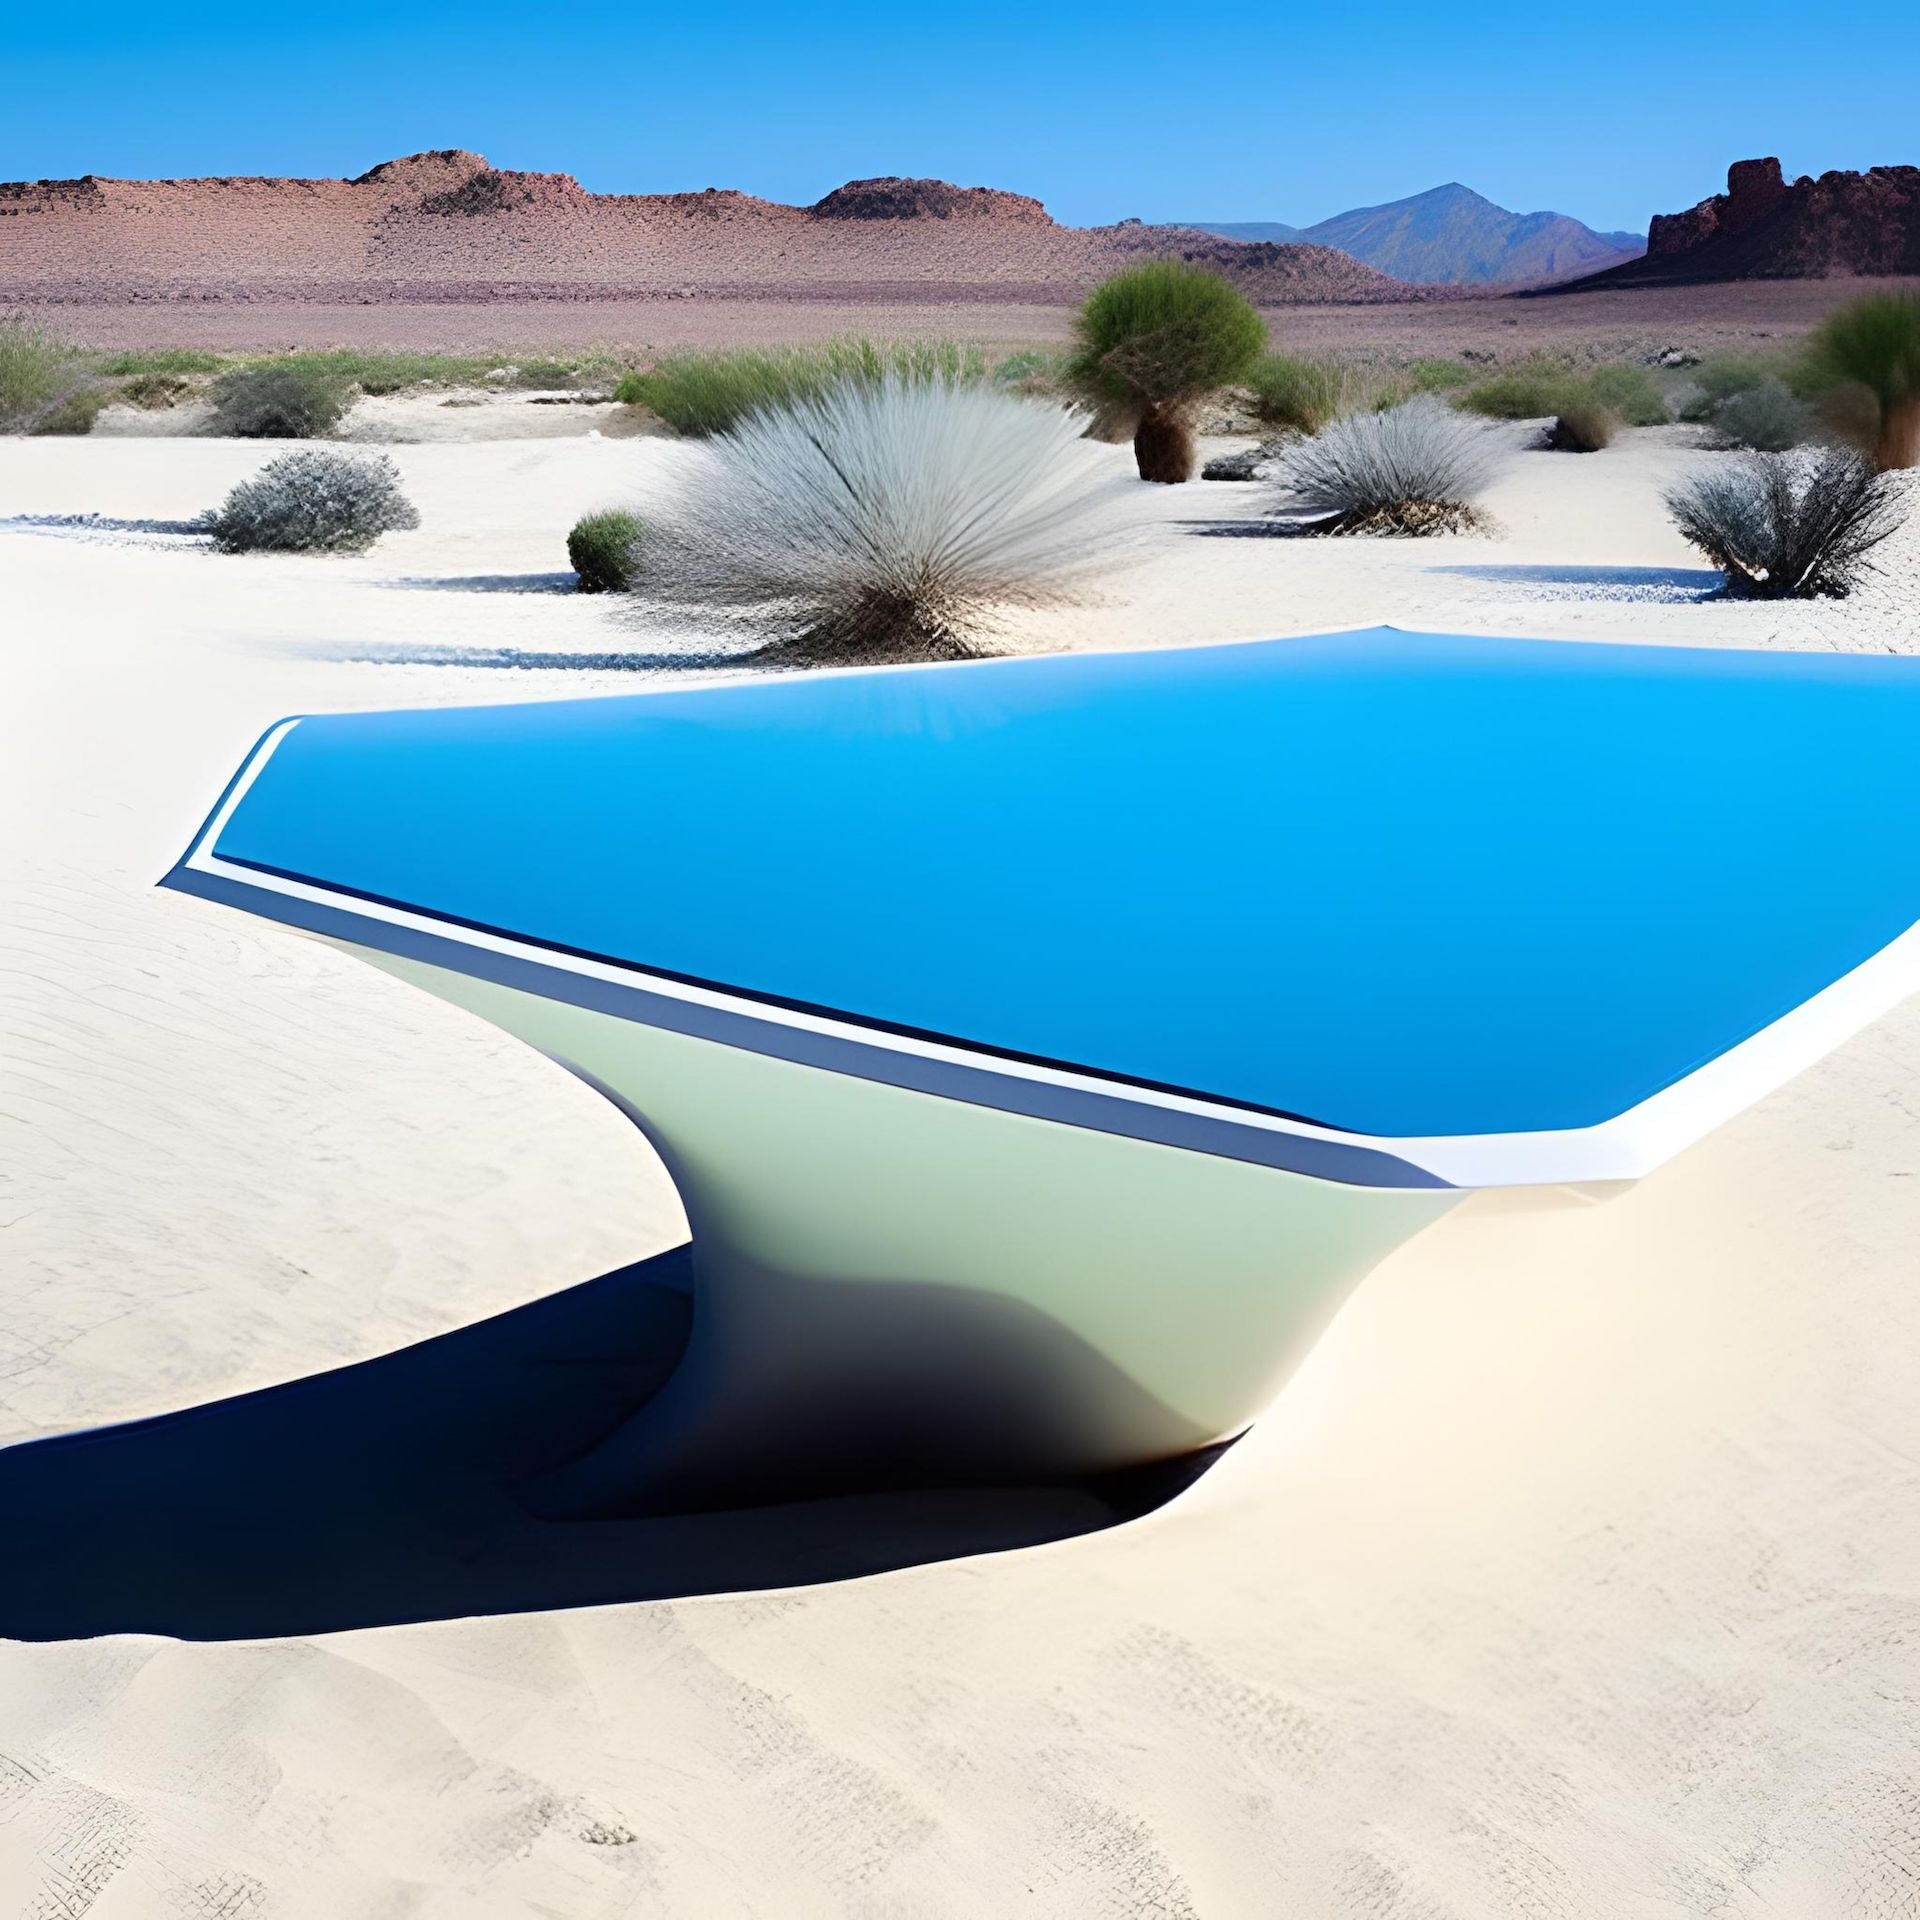 AI-generated image from prompt: "Aqua Table by Zaha Hadid in a desert." Via Canva